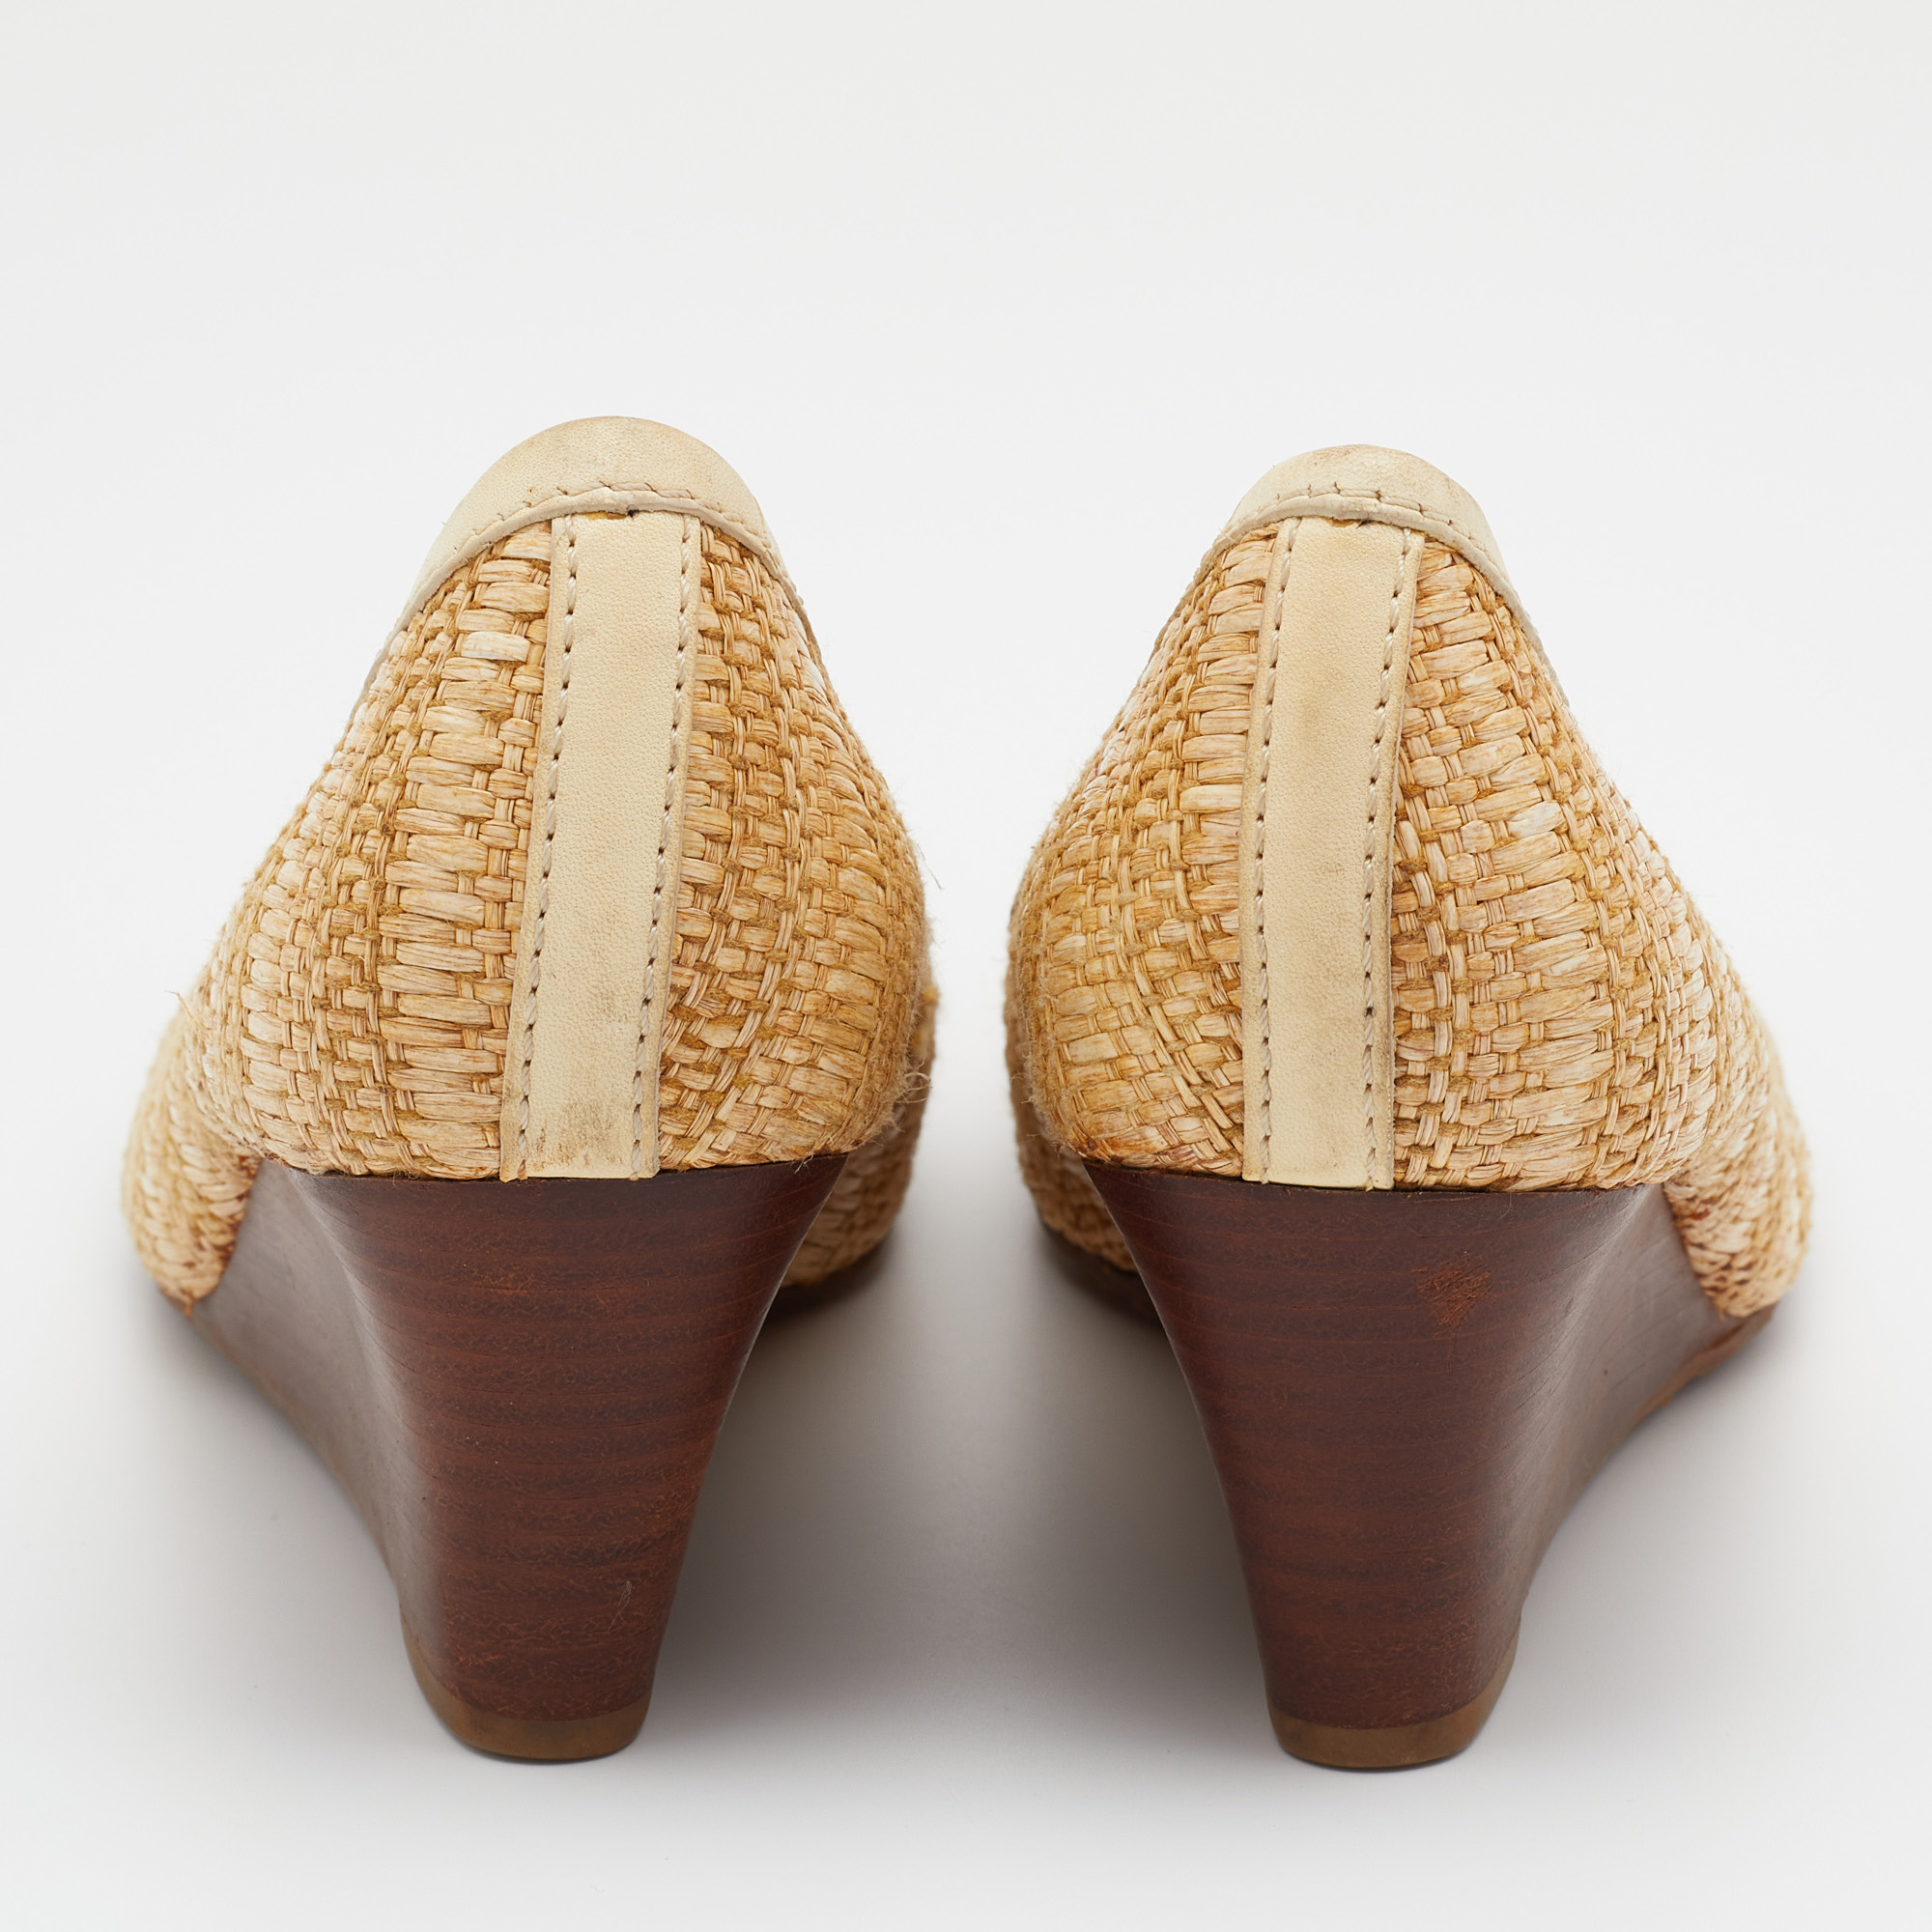 Tory Burch Beige Raffia And Leather Sally Wedge Pumps Size 36.5